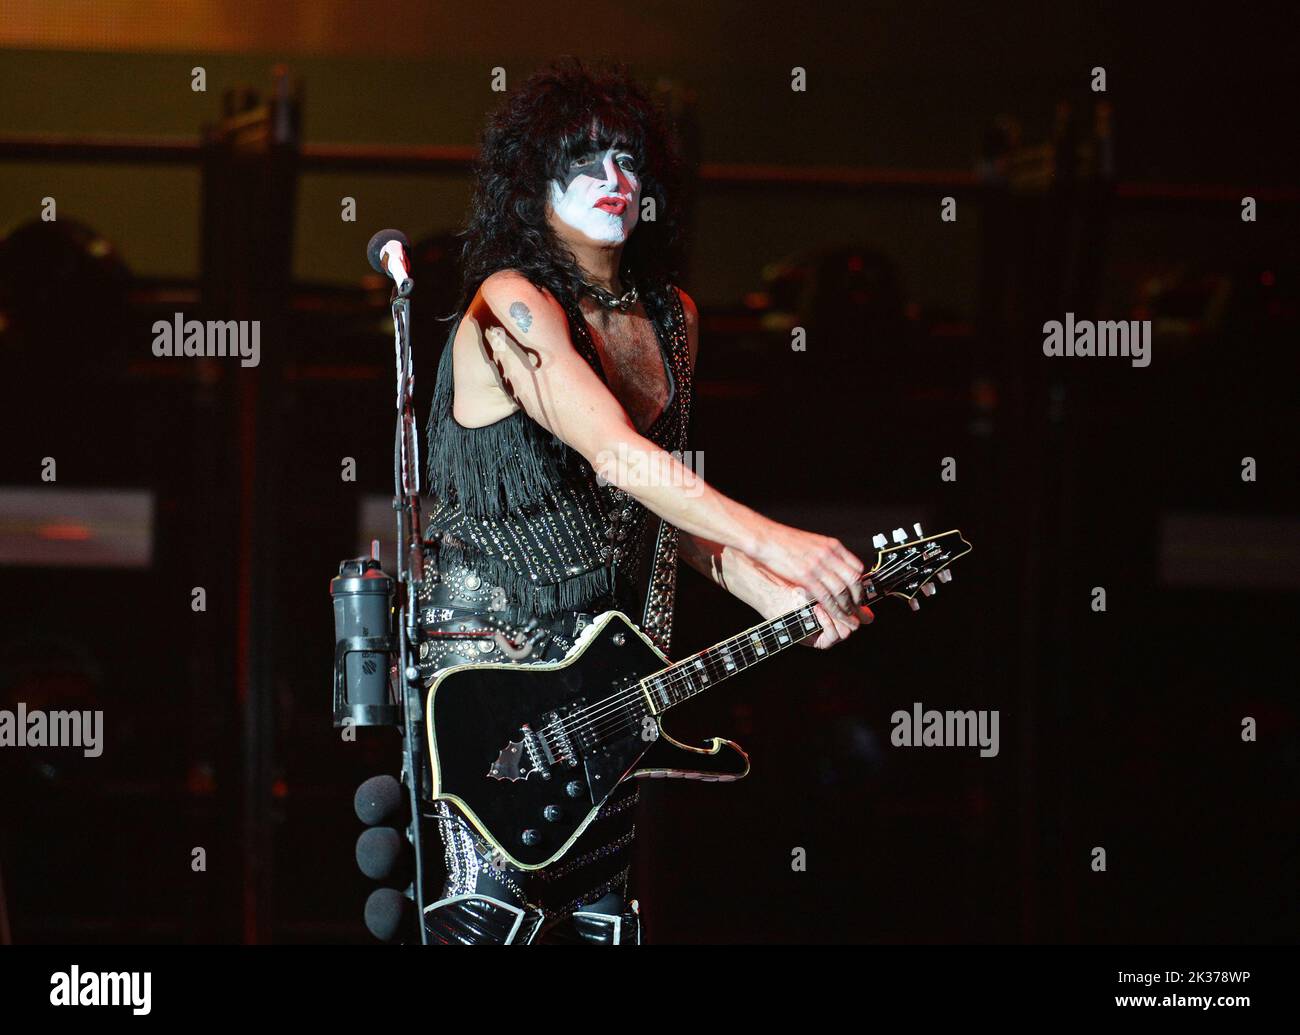 WEST PALM BEACH, FL - SEPTEMBER 21: KISS performs during the 'End of the Road World Tour' at The iTHINK Financial Amphitheatre on September 21, 2022 in West Palm Beach Florida. Credit: mpi04/MediaPunch Stock Photo